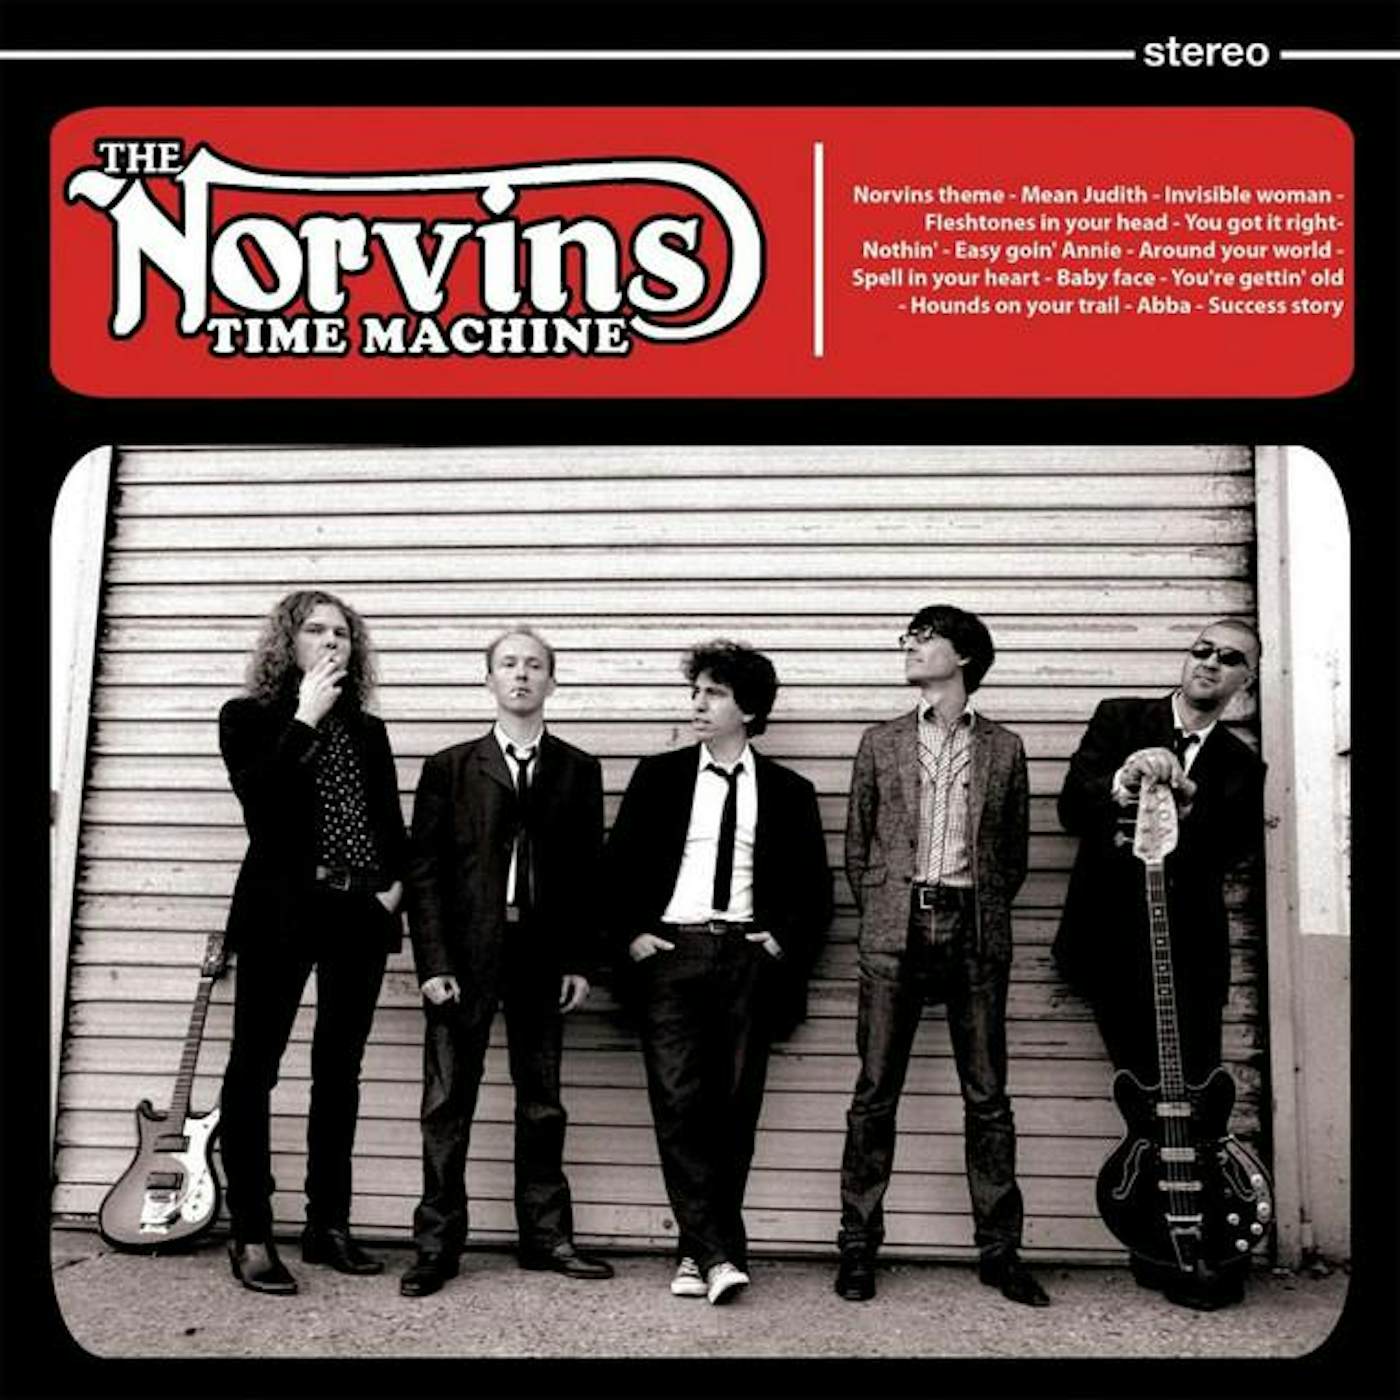 The Norvins